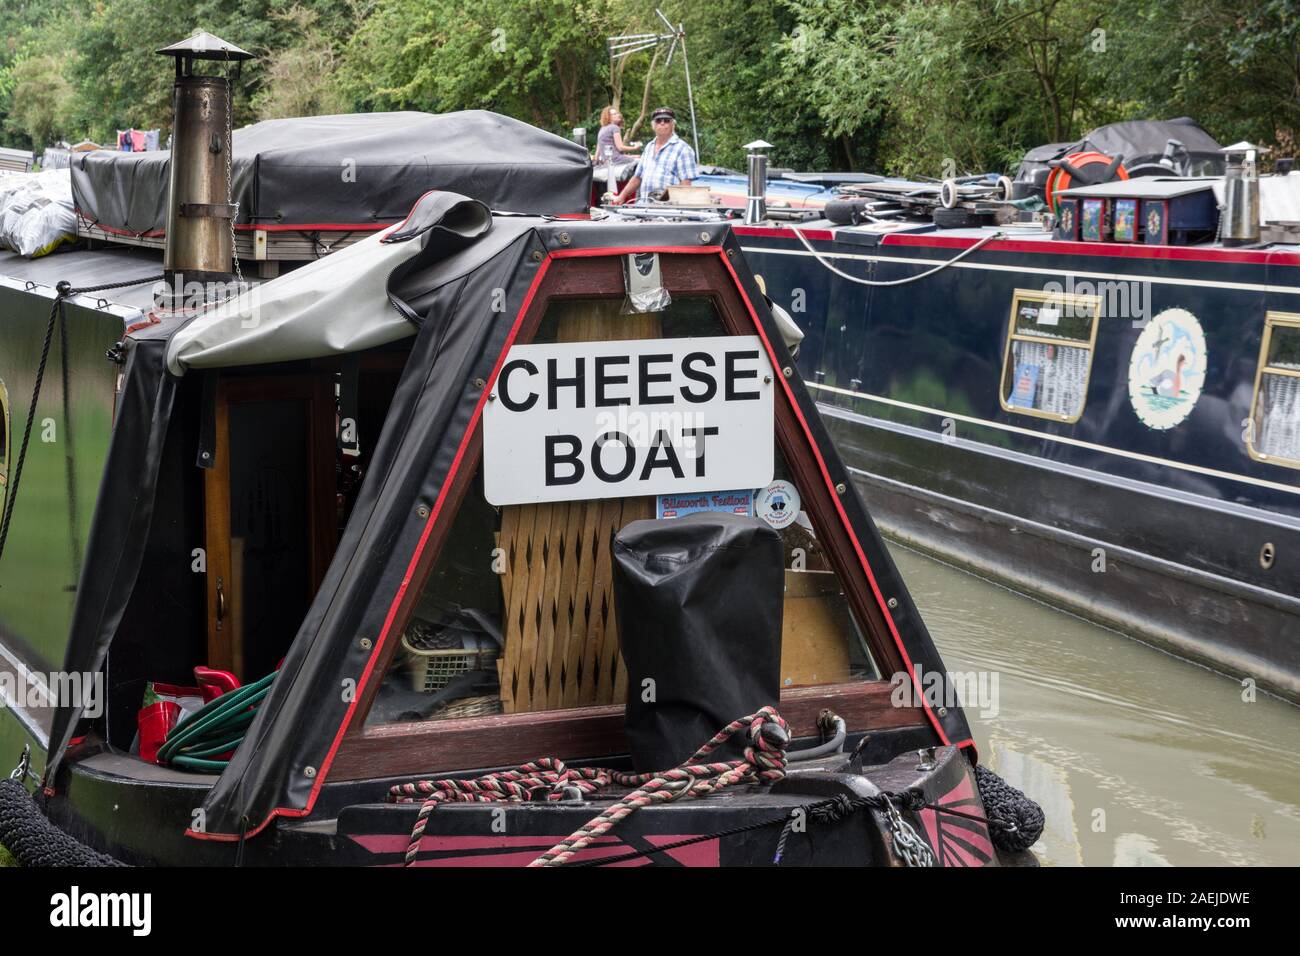 The Cheese Boat, a commercial narrowboat, moored on the Grand Union canal at Cosgrove, Northamptonshire, UK Stock Photo